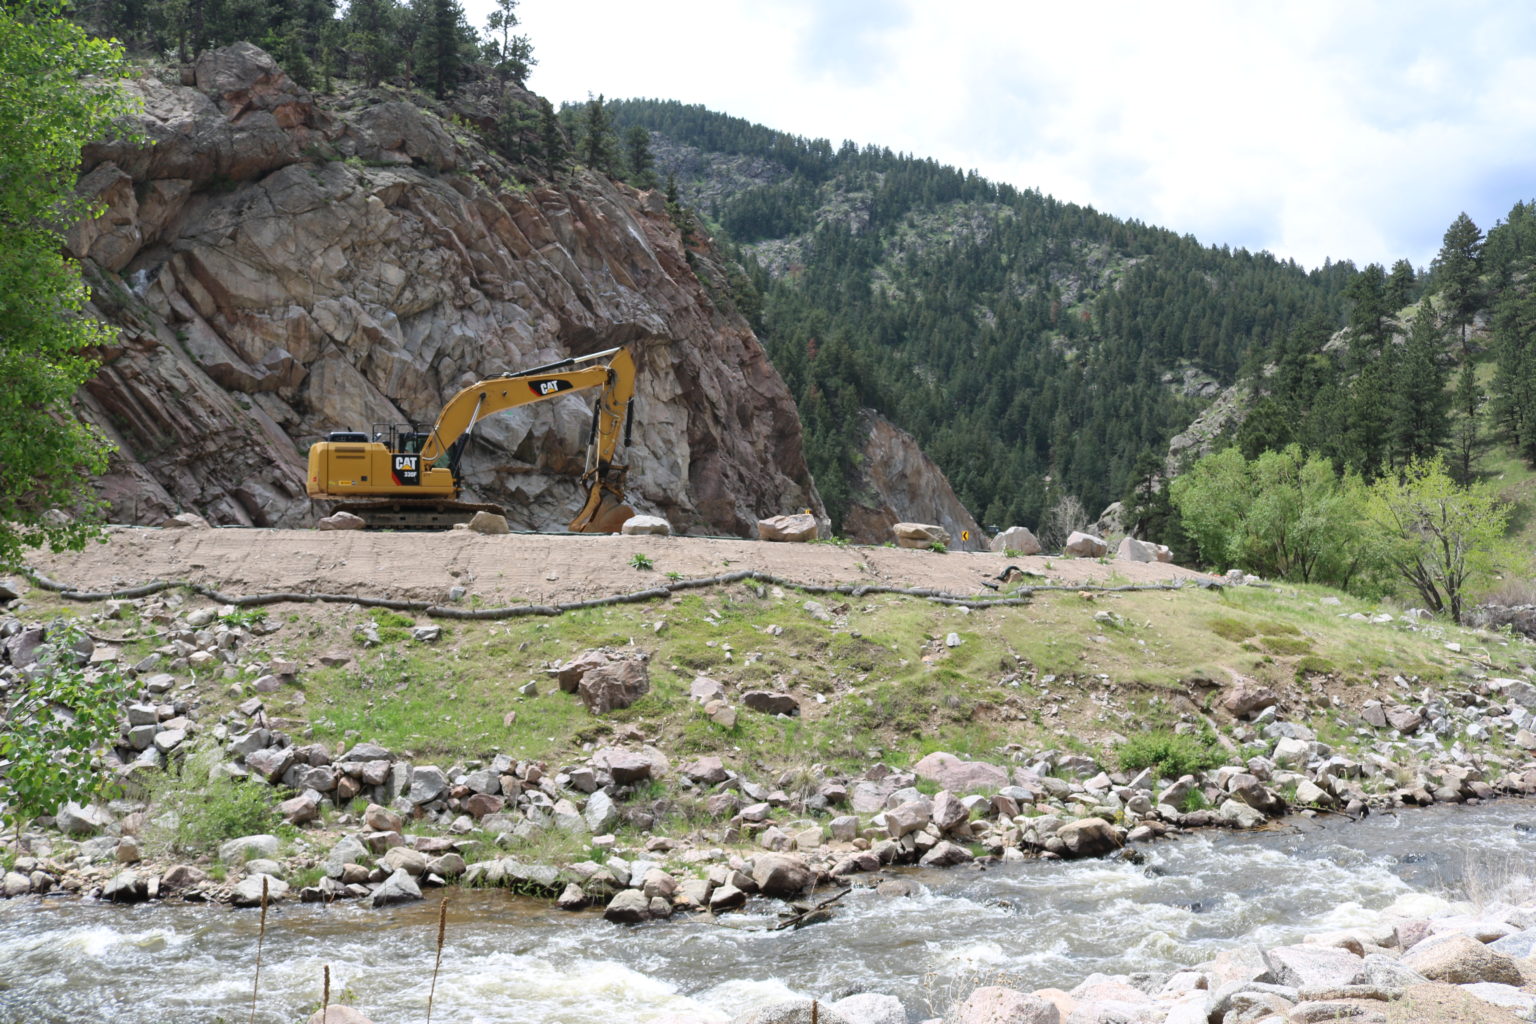 An excavator works near a rushing river.